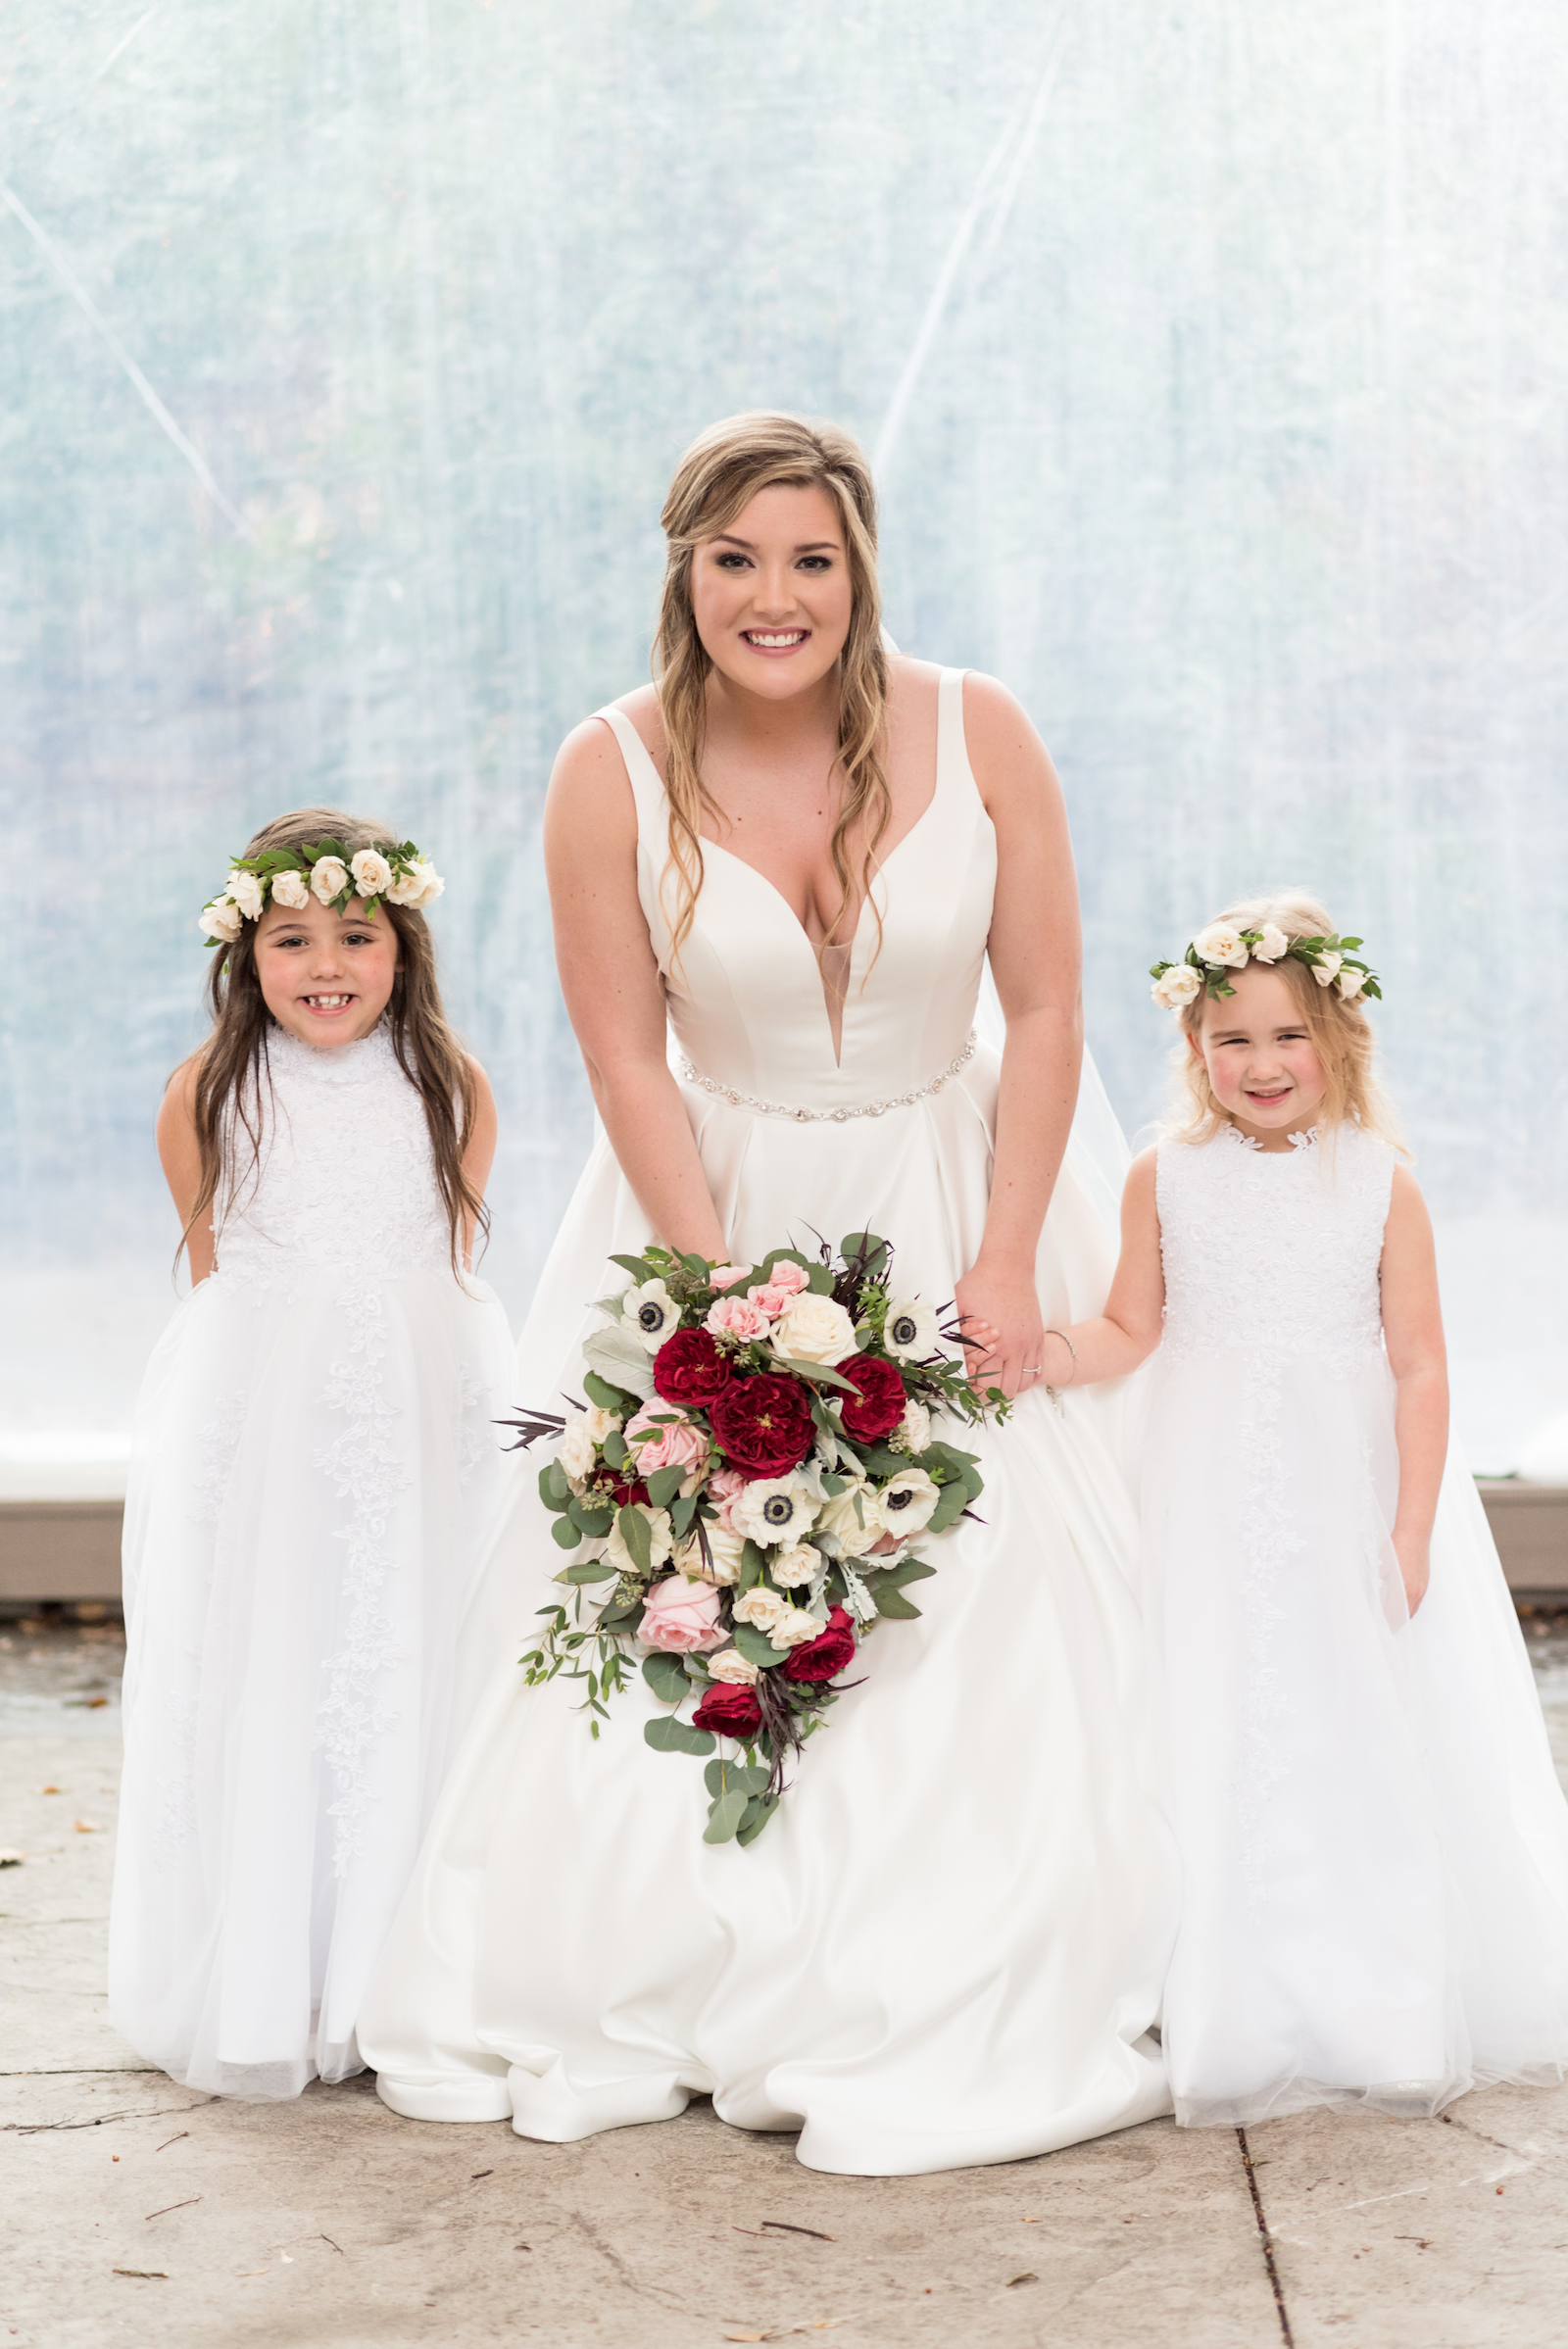 Flower Ideas for Your Flower Girls from Melissa Marie Floral Design featured on Nashville Bride Guide